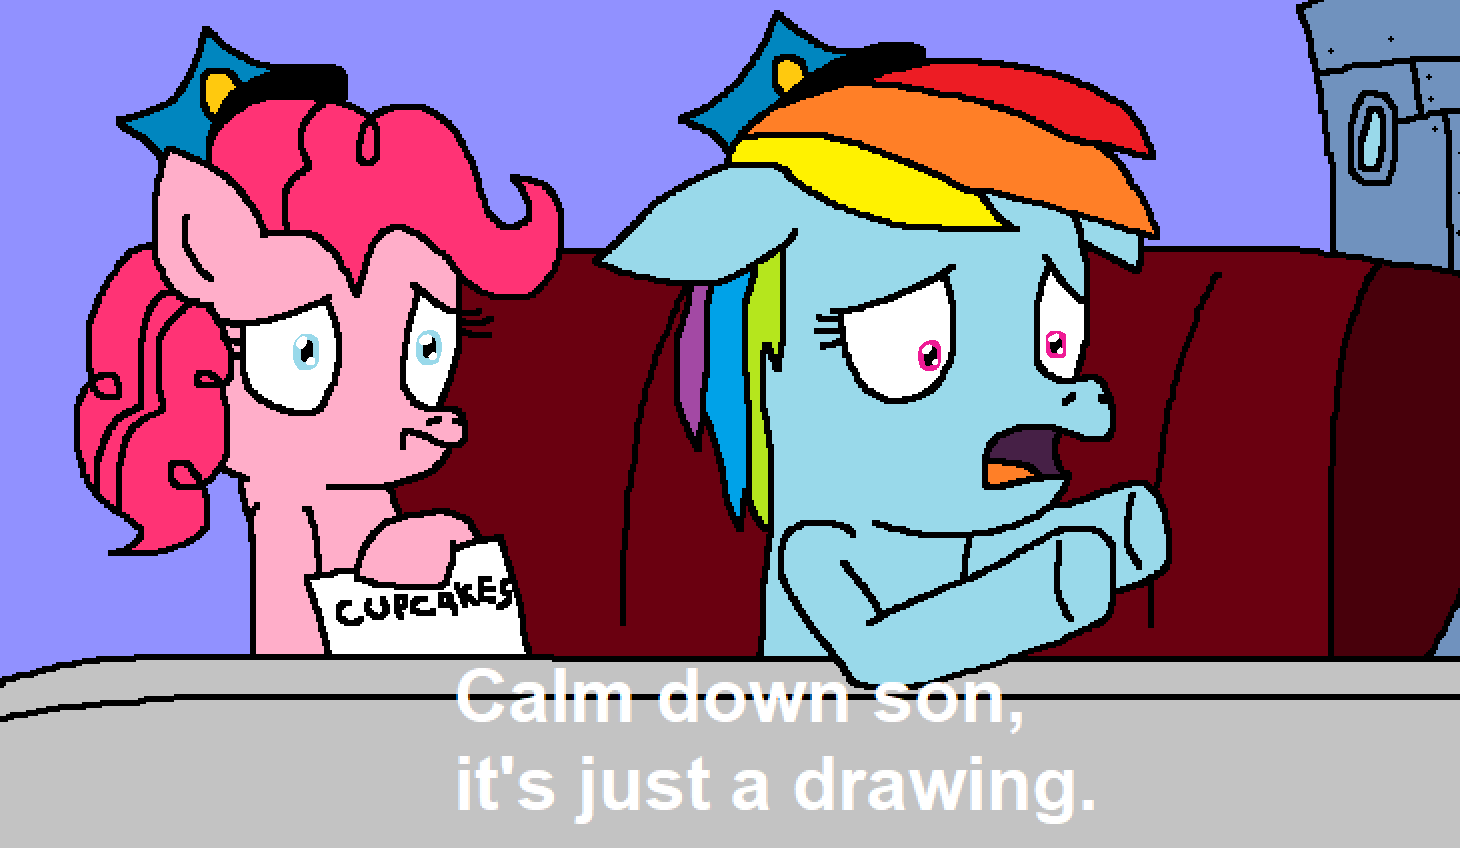 CALM DOWN SON, IT'S JUST A DRAWING